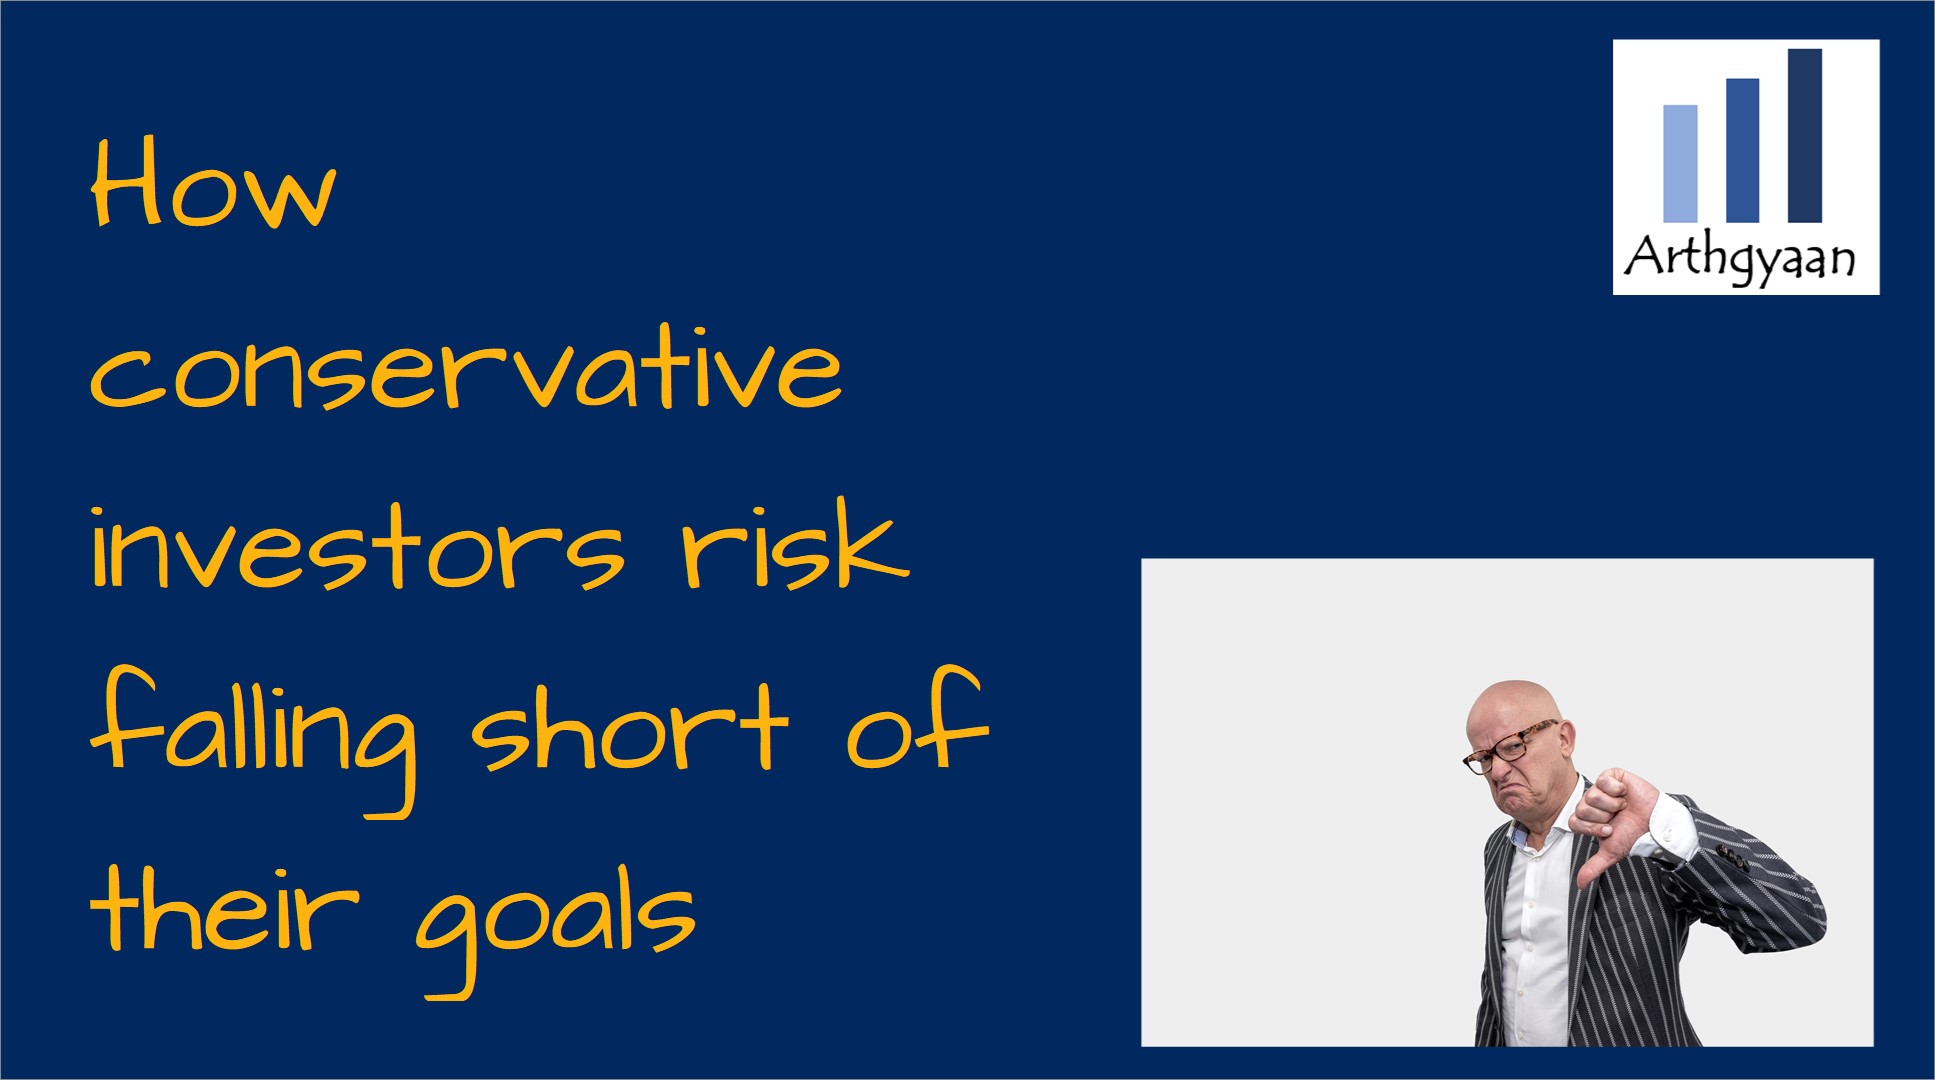 How conservative investors risk falling short of their goals